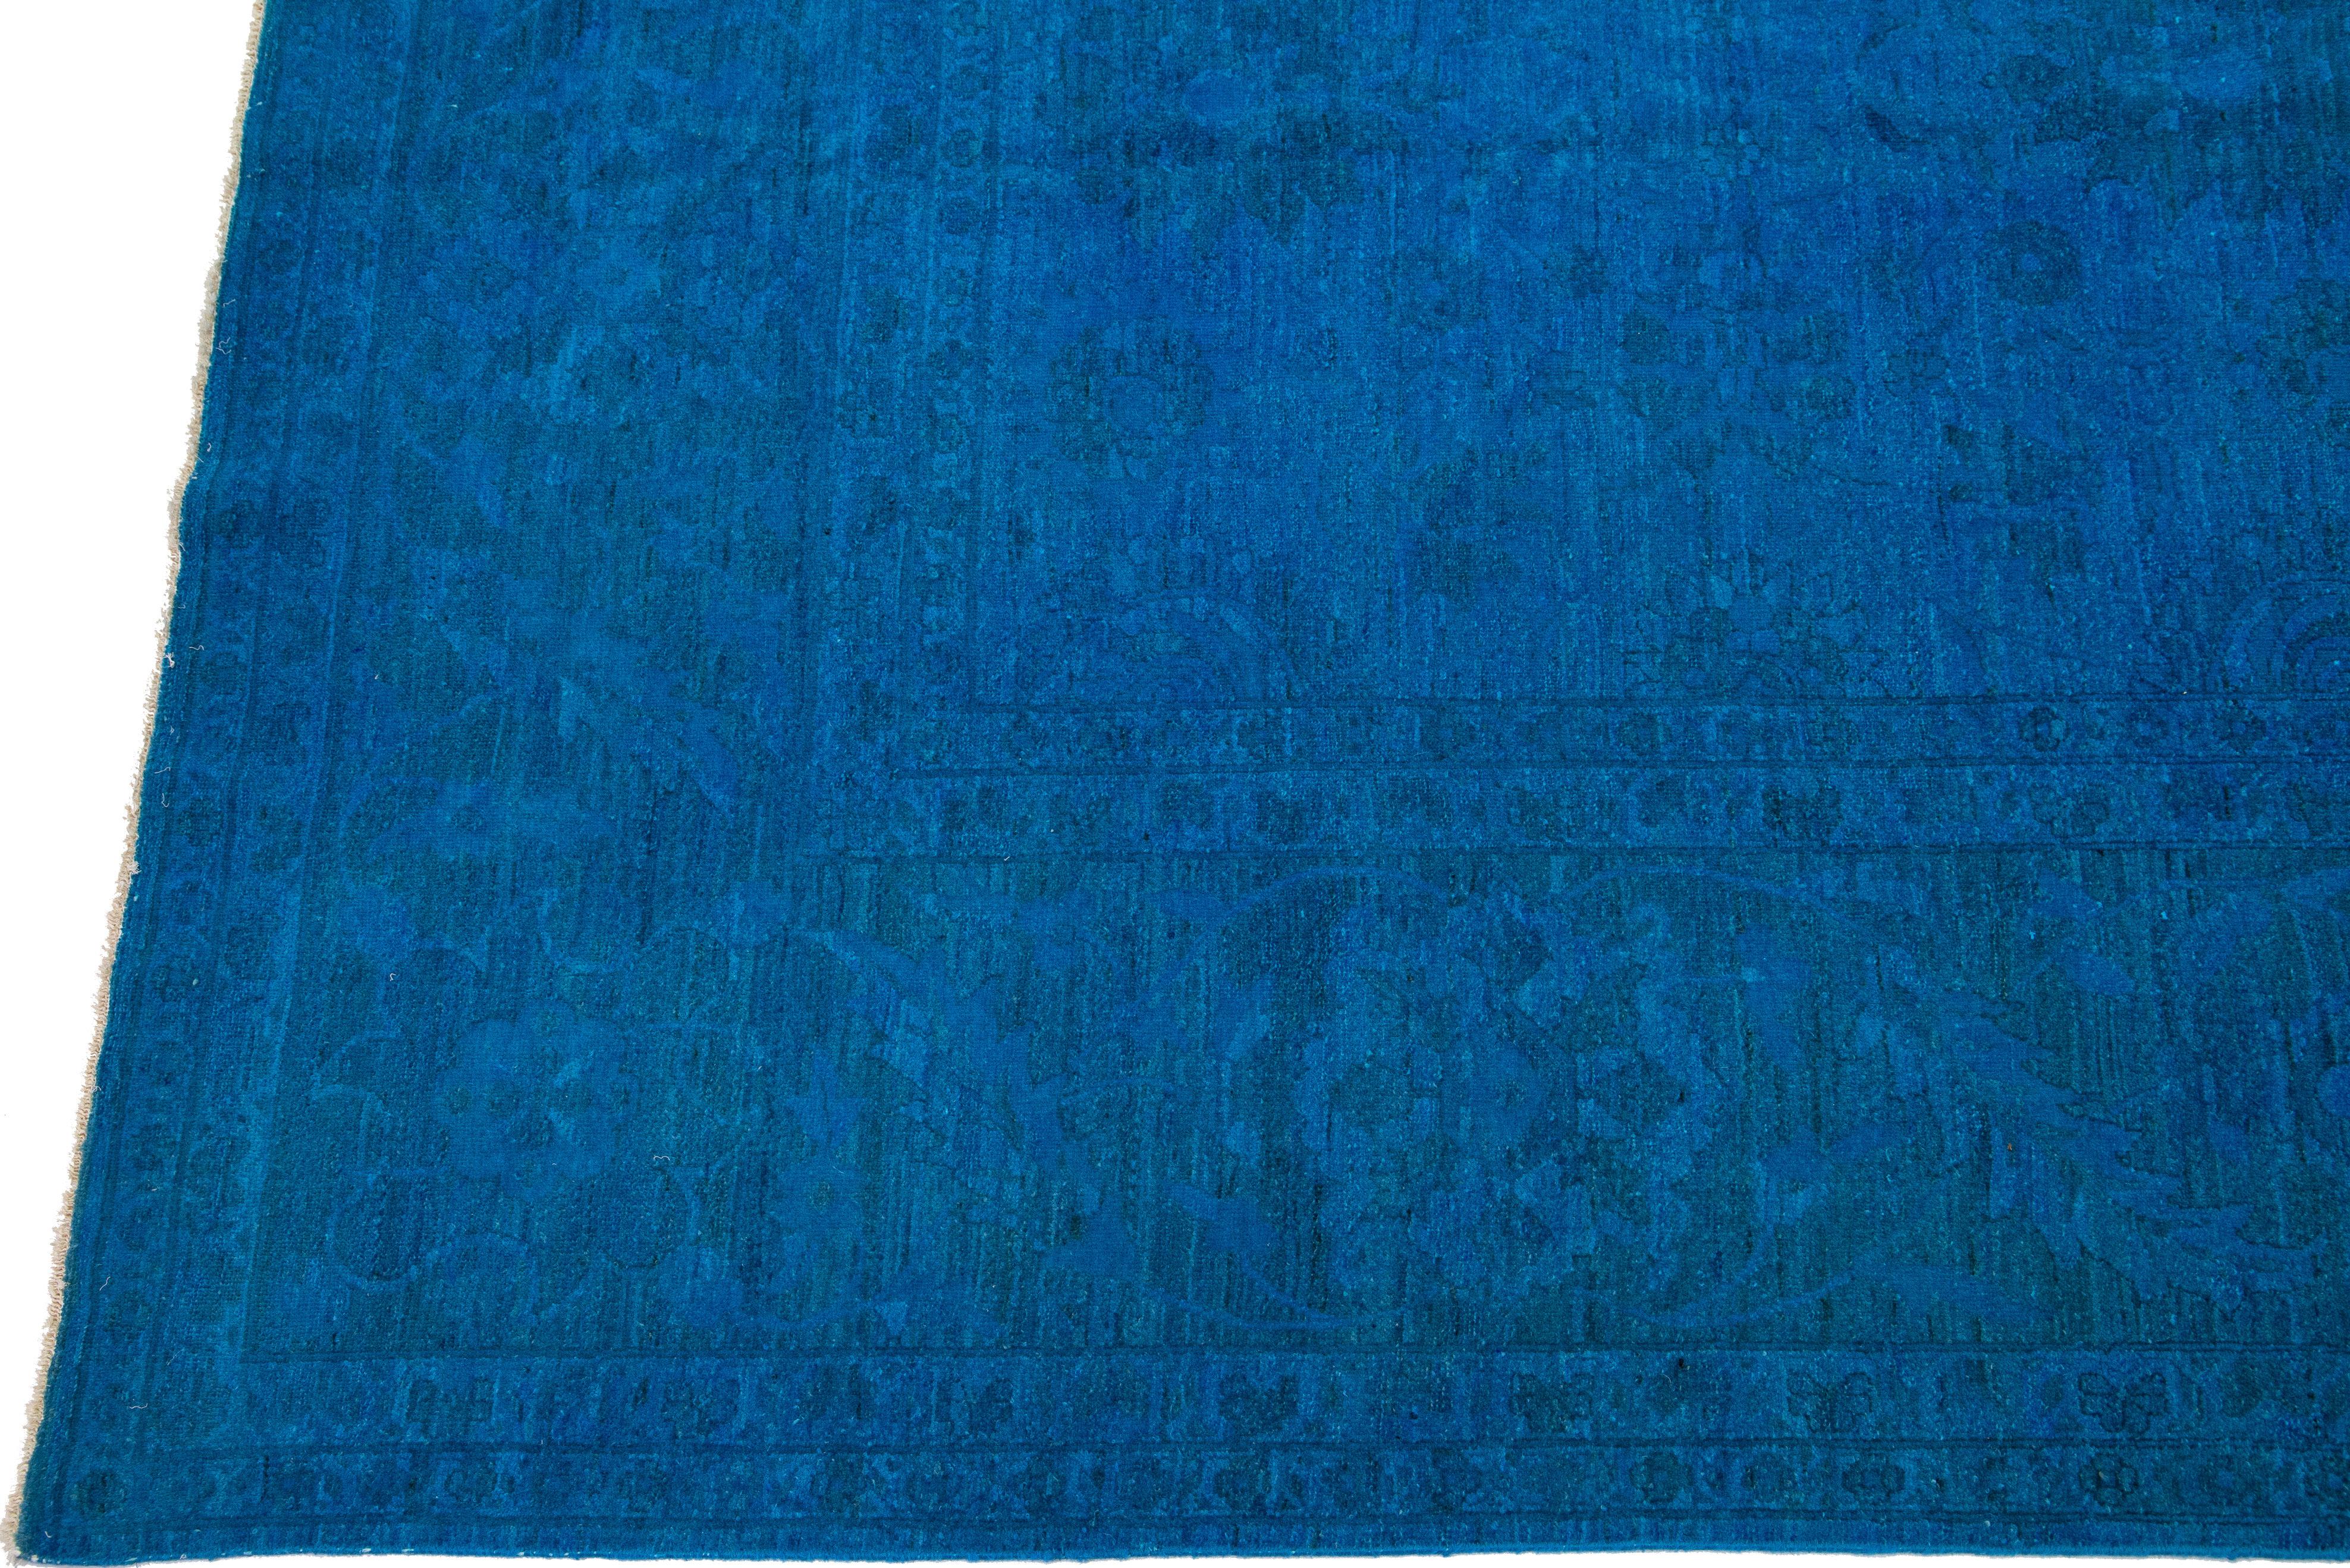 Blue Vintage Allover Motif Handmade Overdyed Wool Rug In Good Condition For Sale In Norwalk, CT